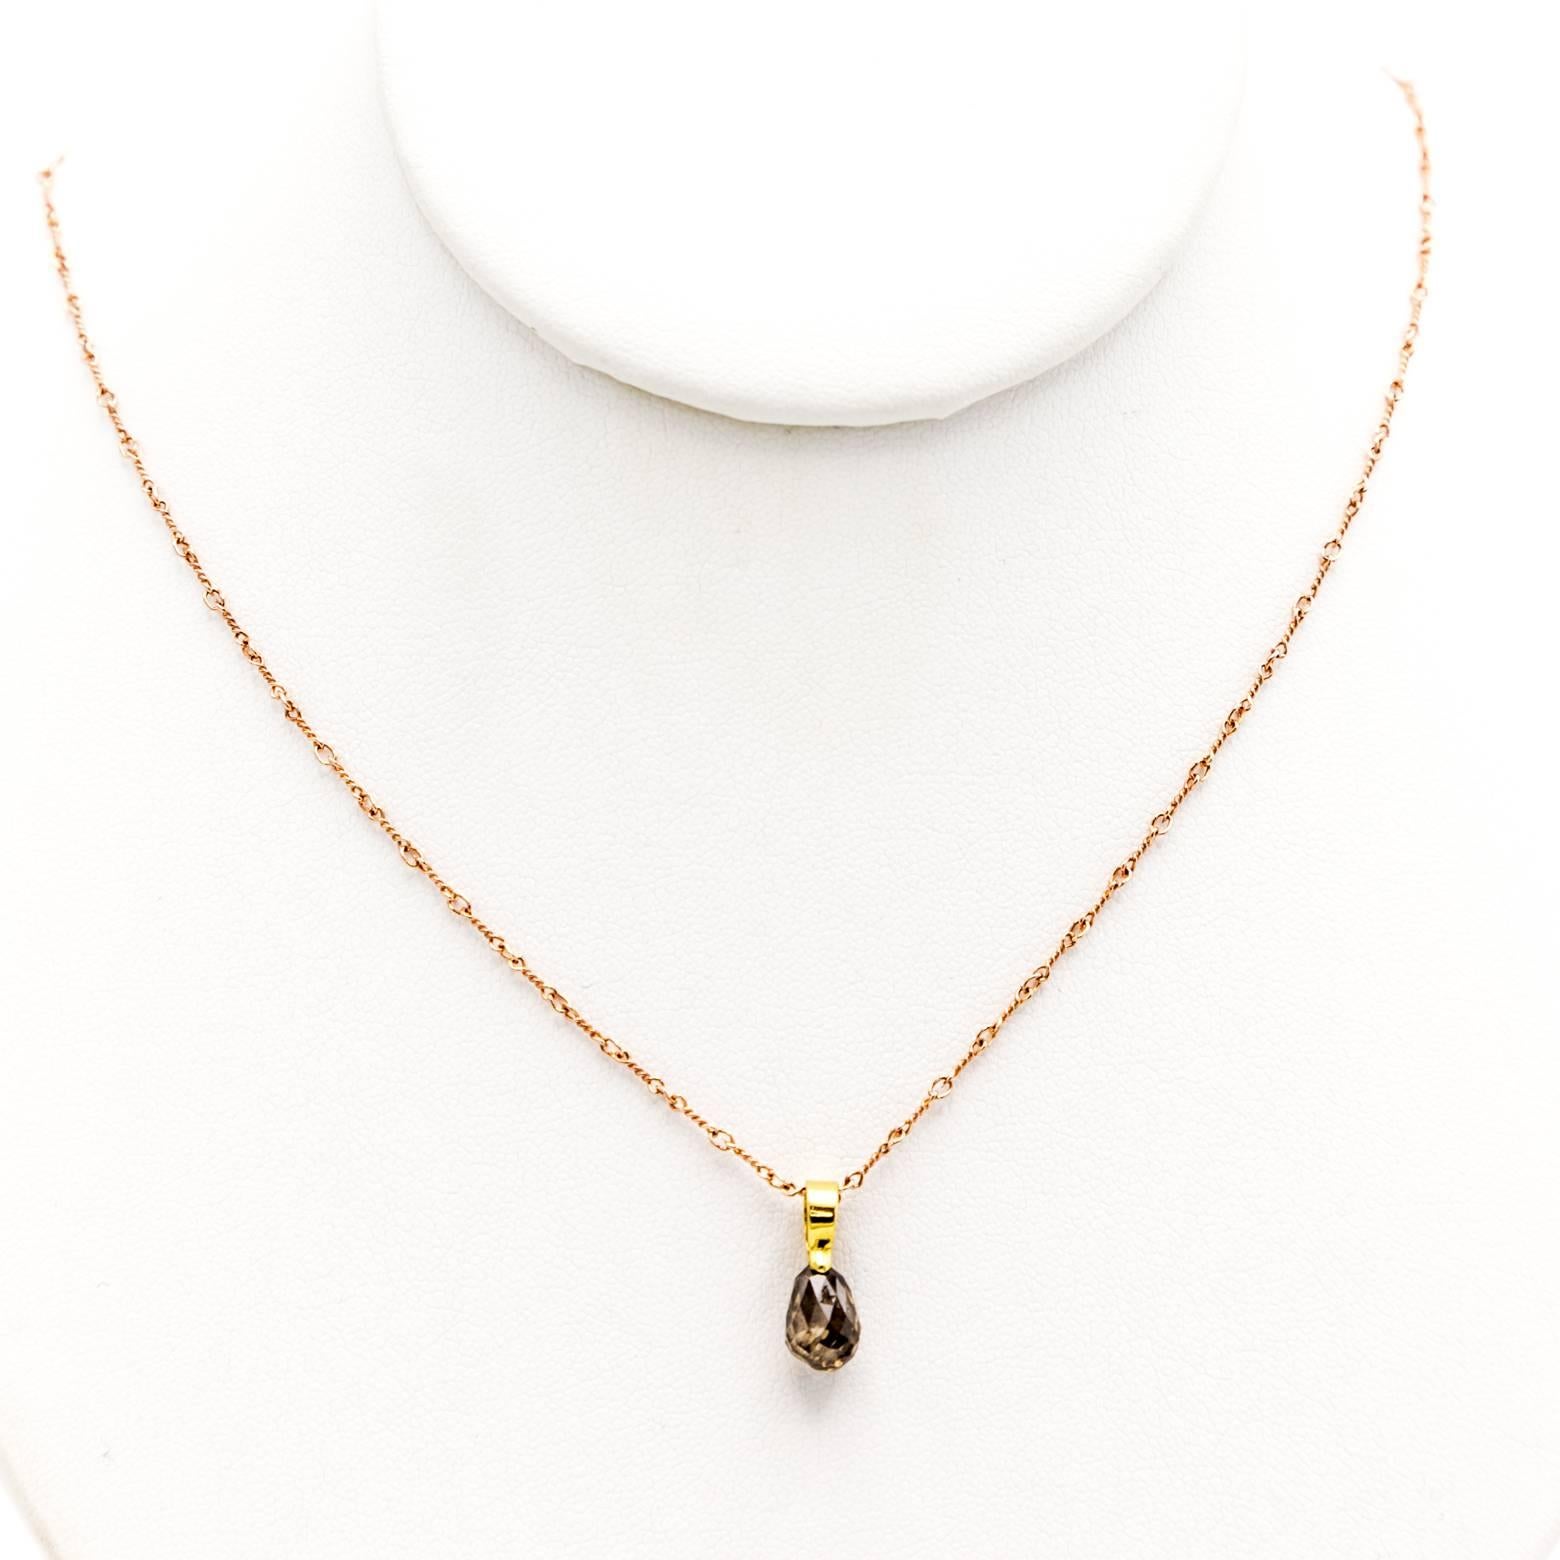 This sparkly and stunning deep Champagne Cognac Coffee color diamond briolette pendant hangs beautifully from 18K Yellow Gold. Absolutely magnificent with light reflections dancing and singing around your neck. Approximately 2.20 carats and